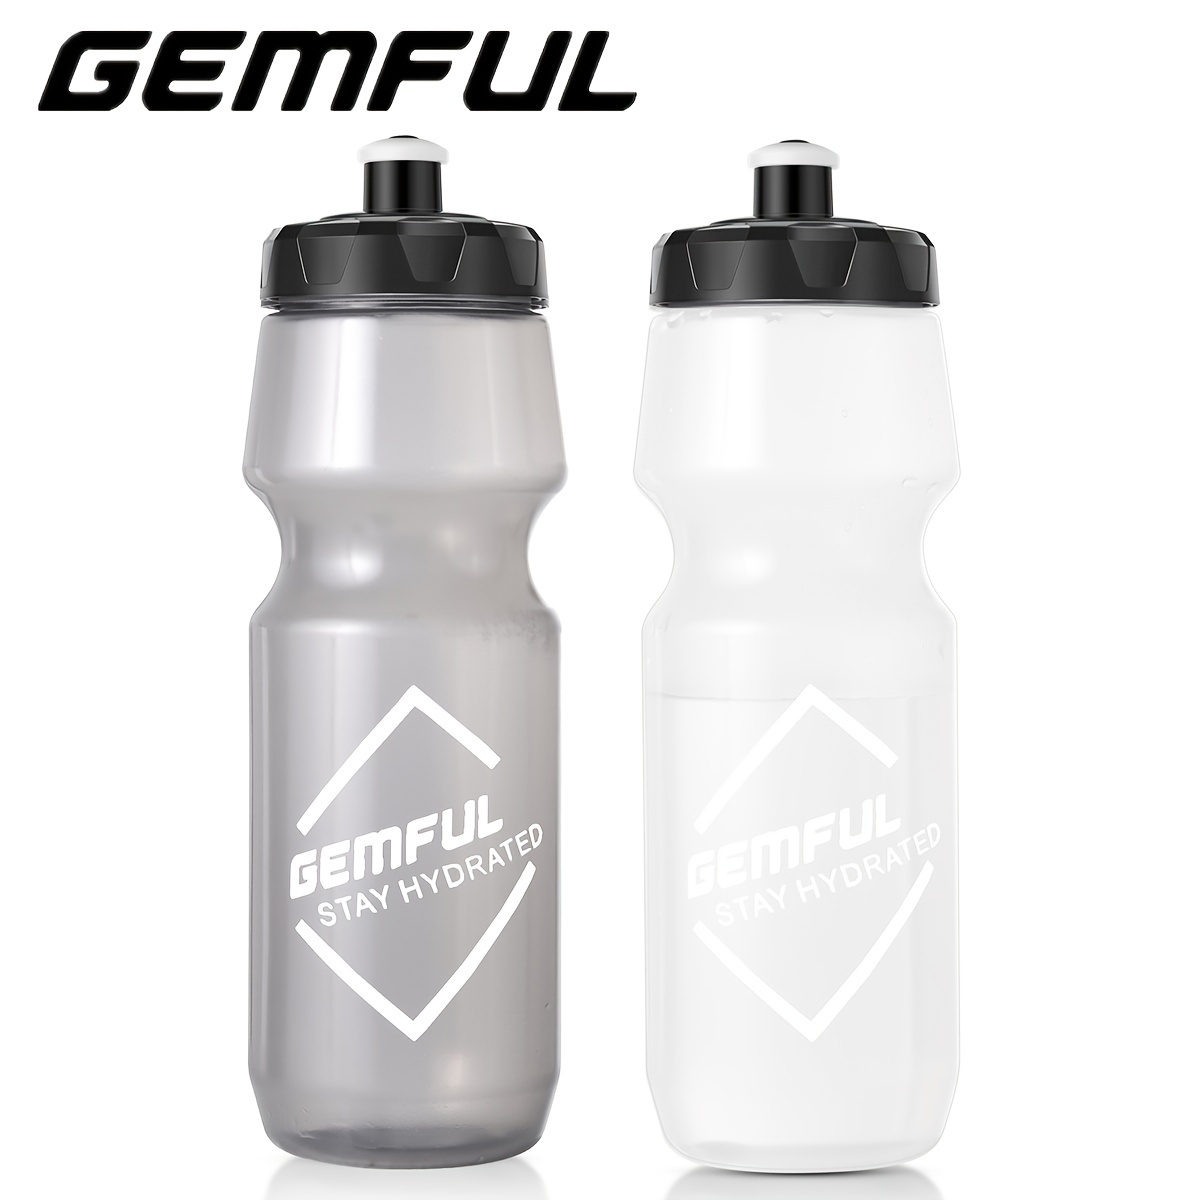 

750ml Gemful Bicycle Water Bottles - Bpa-free Squeeze Sports Drink Bottle For Cycling And Outdoor Activities